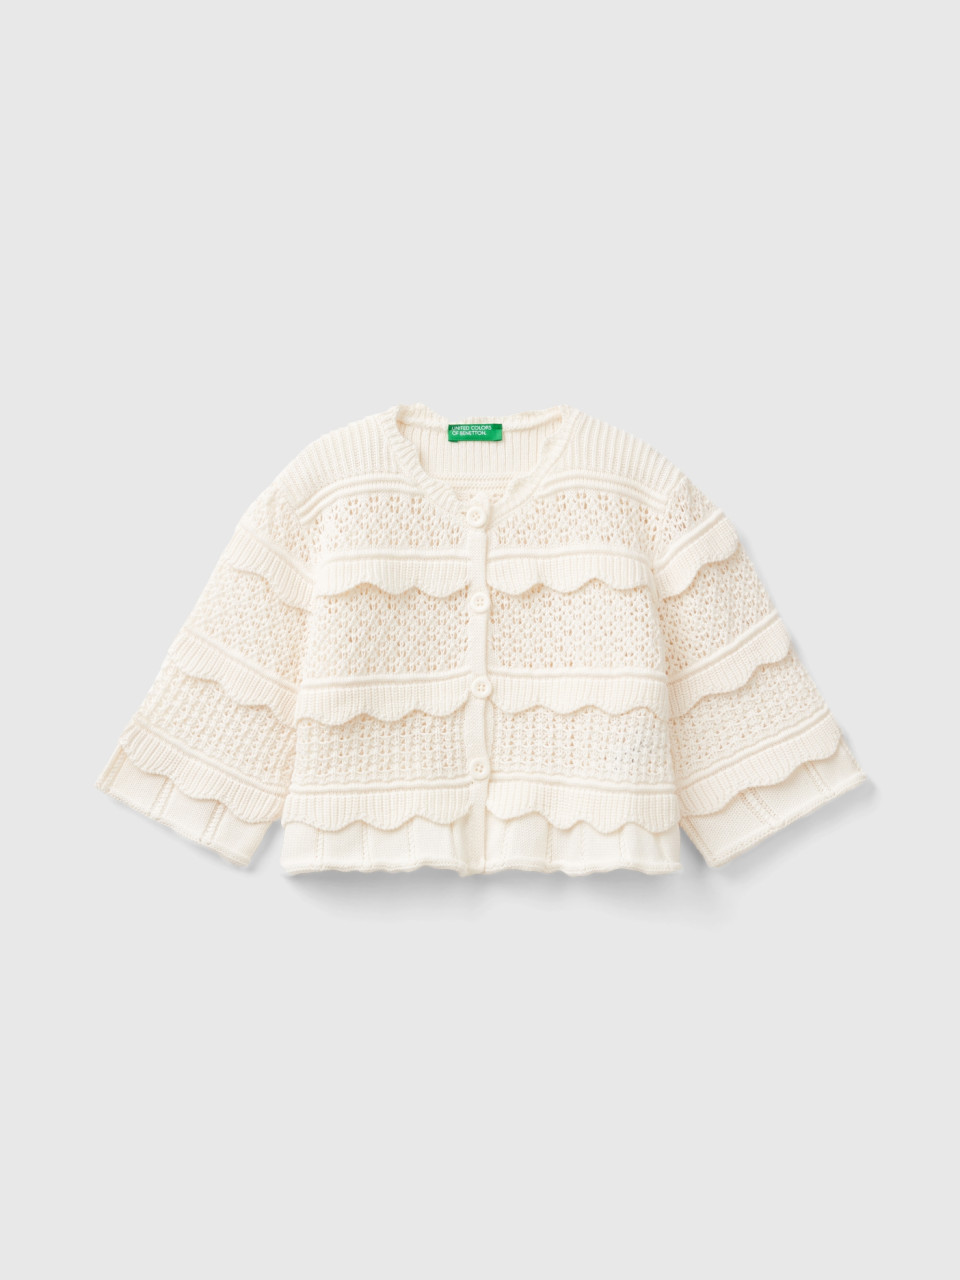 Benetton, Knit Cardigan With Buttons, Creamy White, Kids